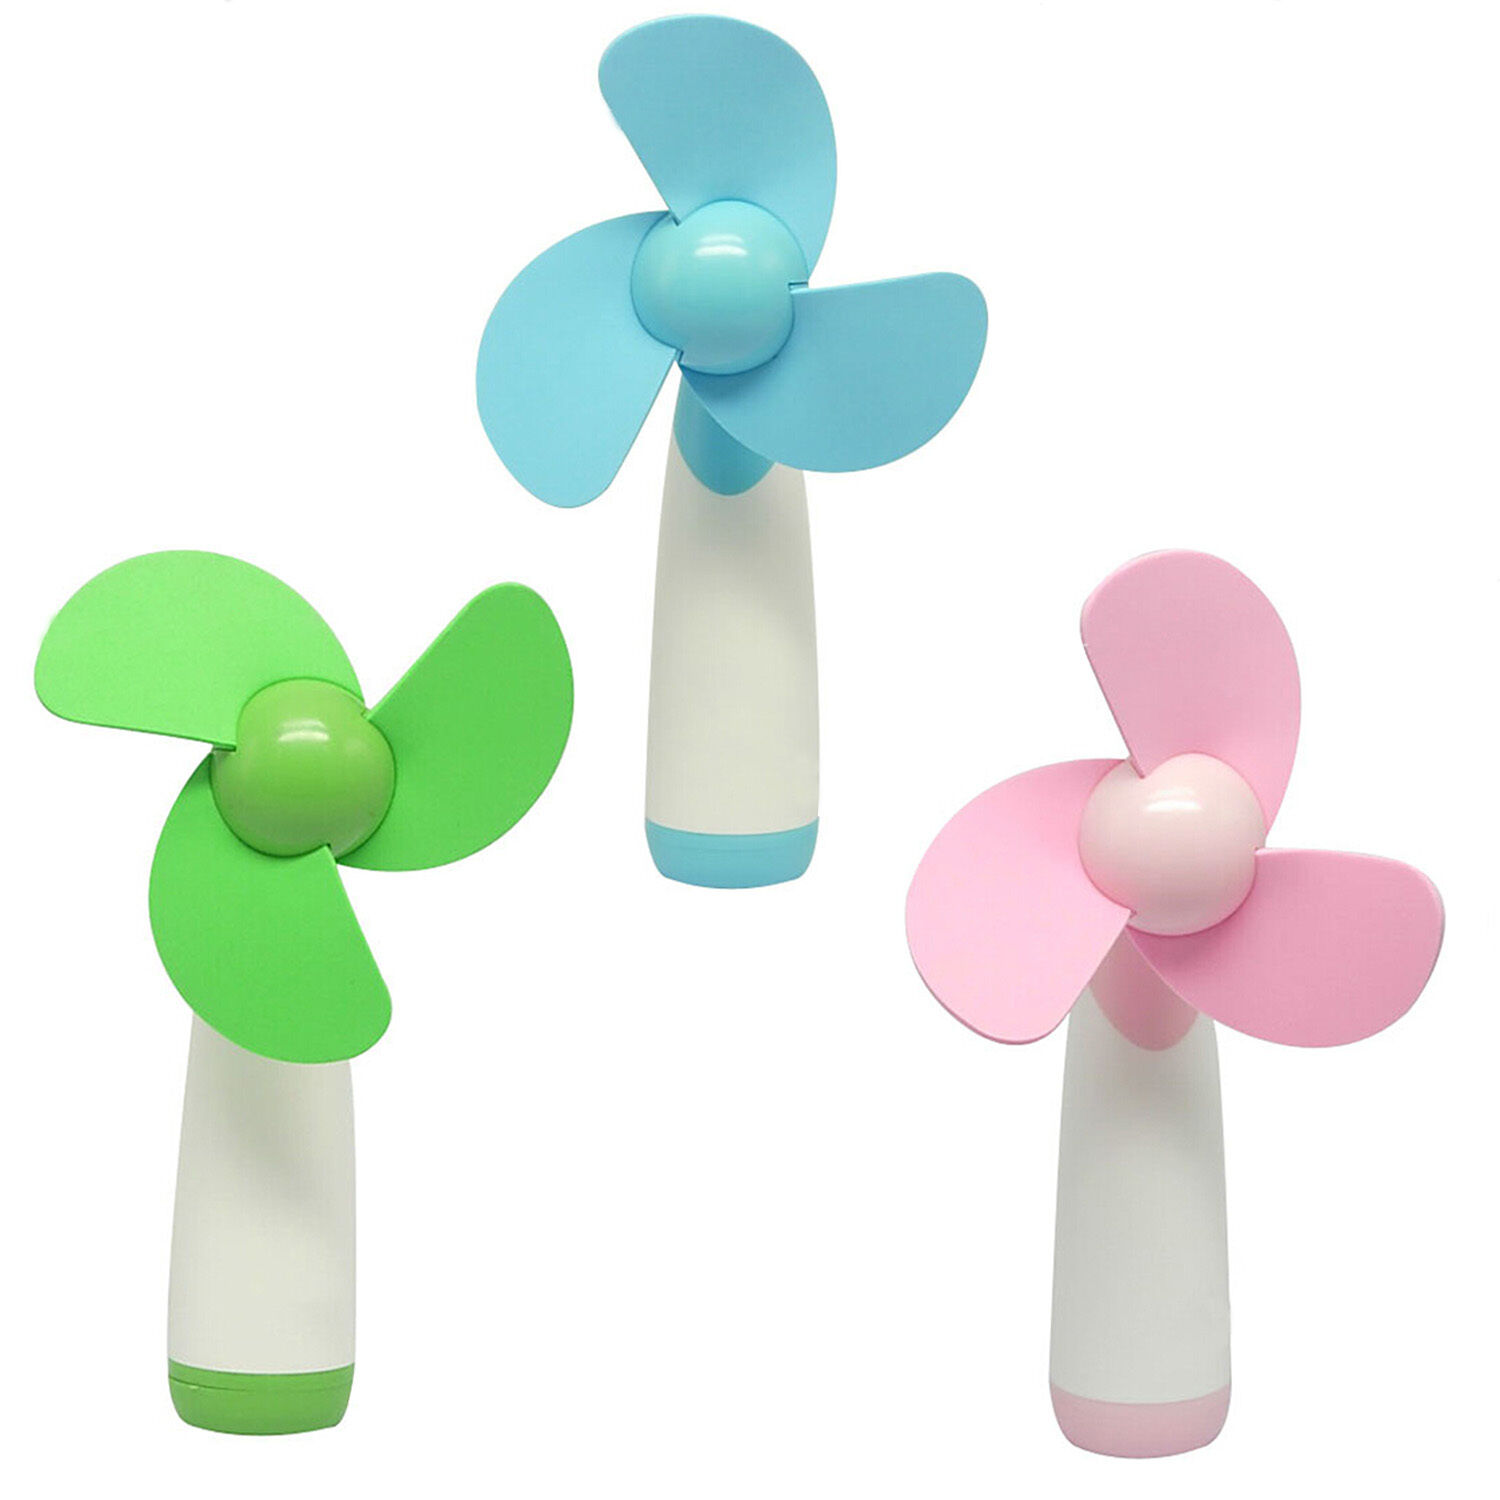 Mini Fan - Portable Personal Handheld Battery Operated Electric Soft Foam Blades